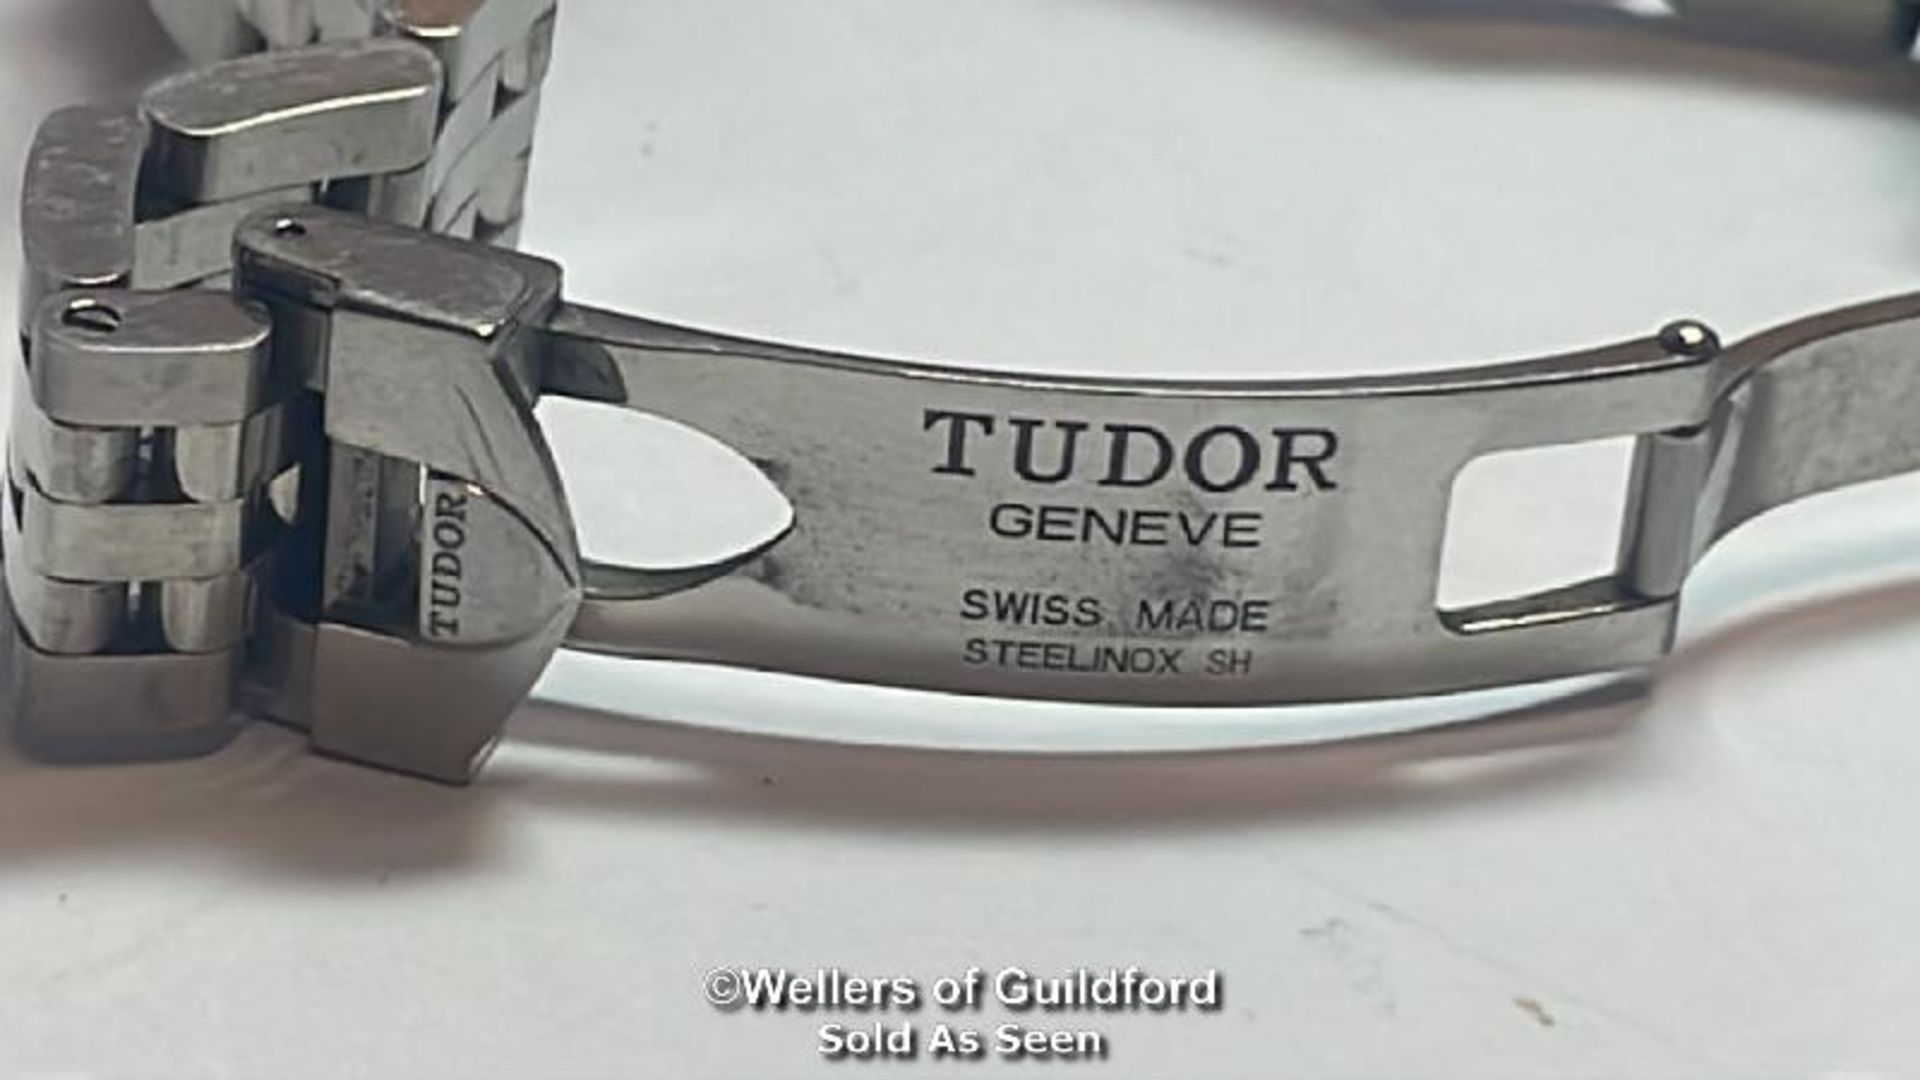 Tudor Geneve stainless steel wristwatch model M15000, 2.5cm dial with ten round brilliant cut - Image 10 of 12